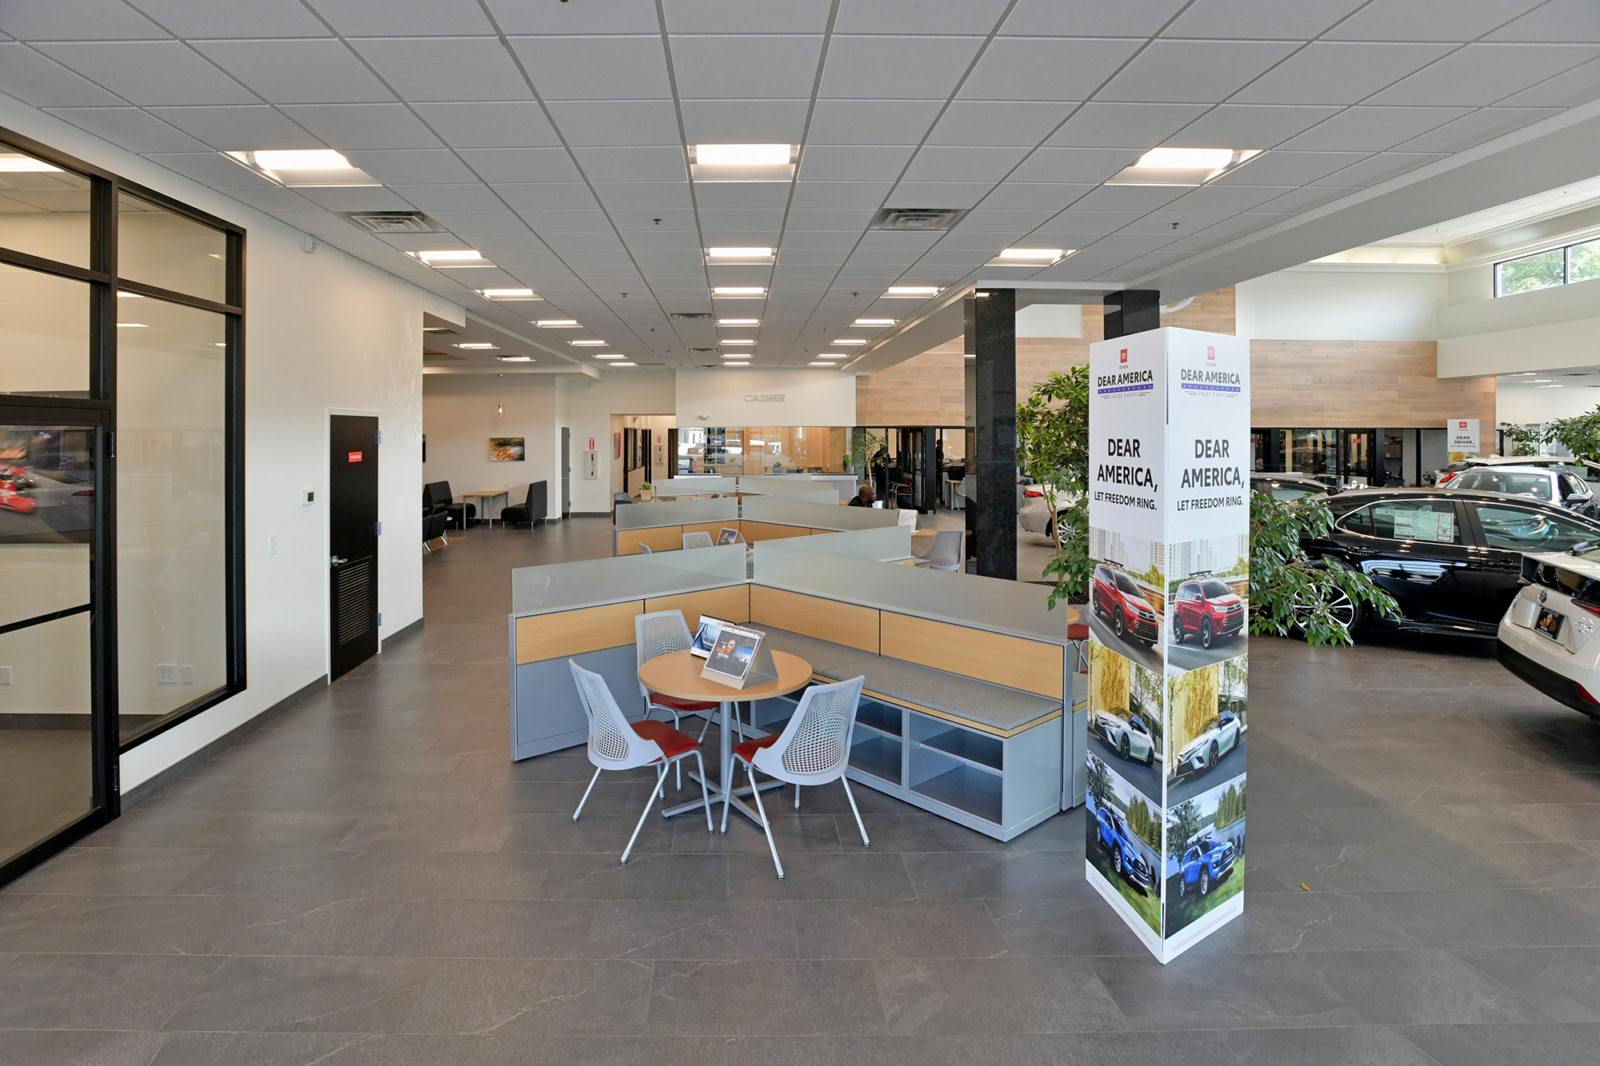 Overall view of the main showroom at a car dealership, showing Herman Miller Canvas workstations and seating as the sales area.